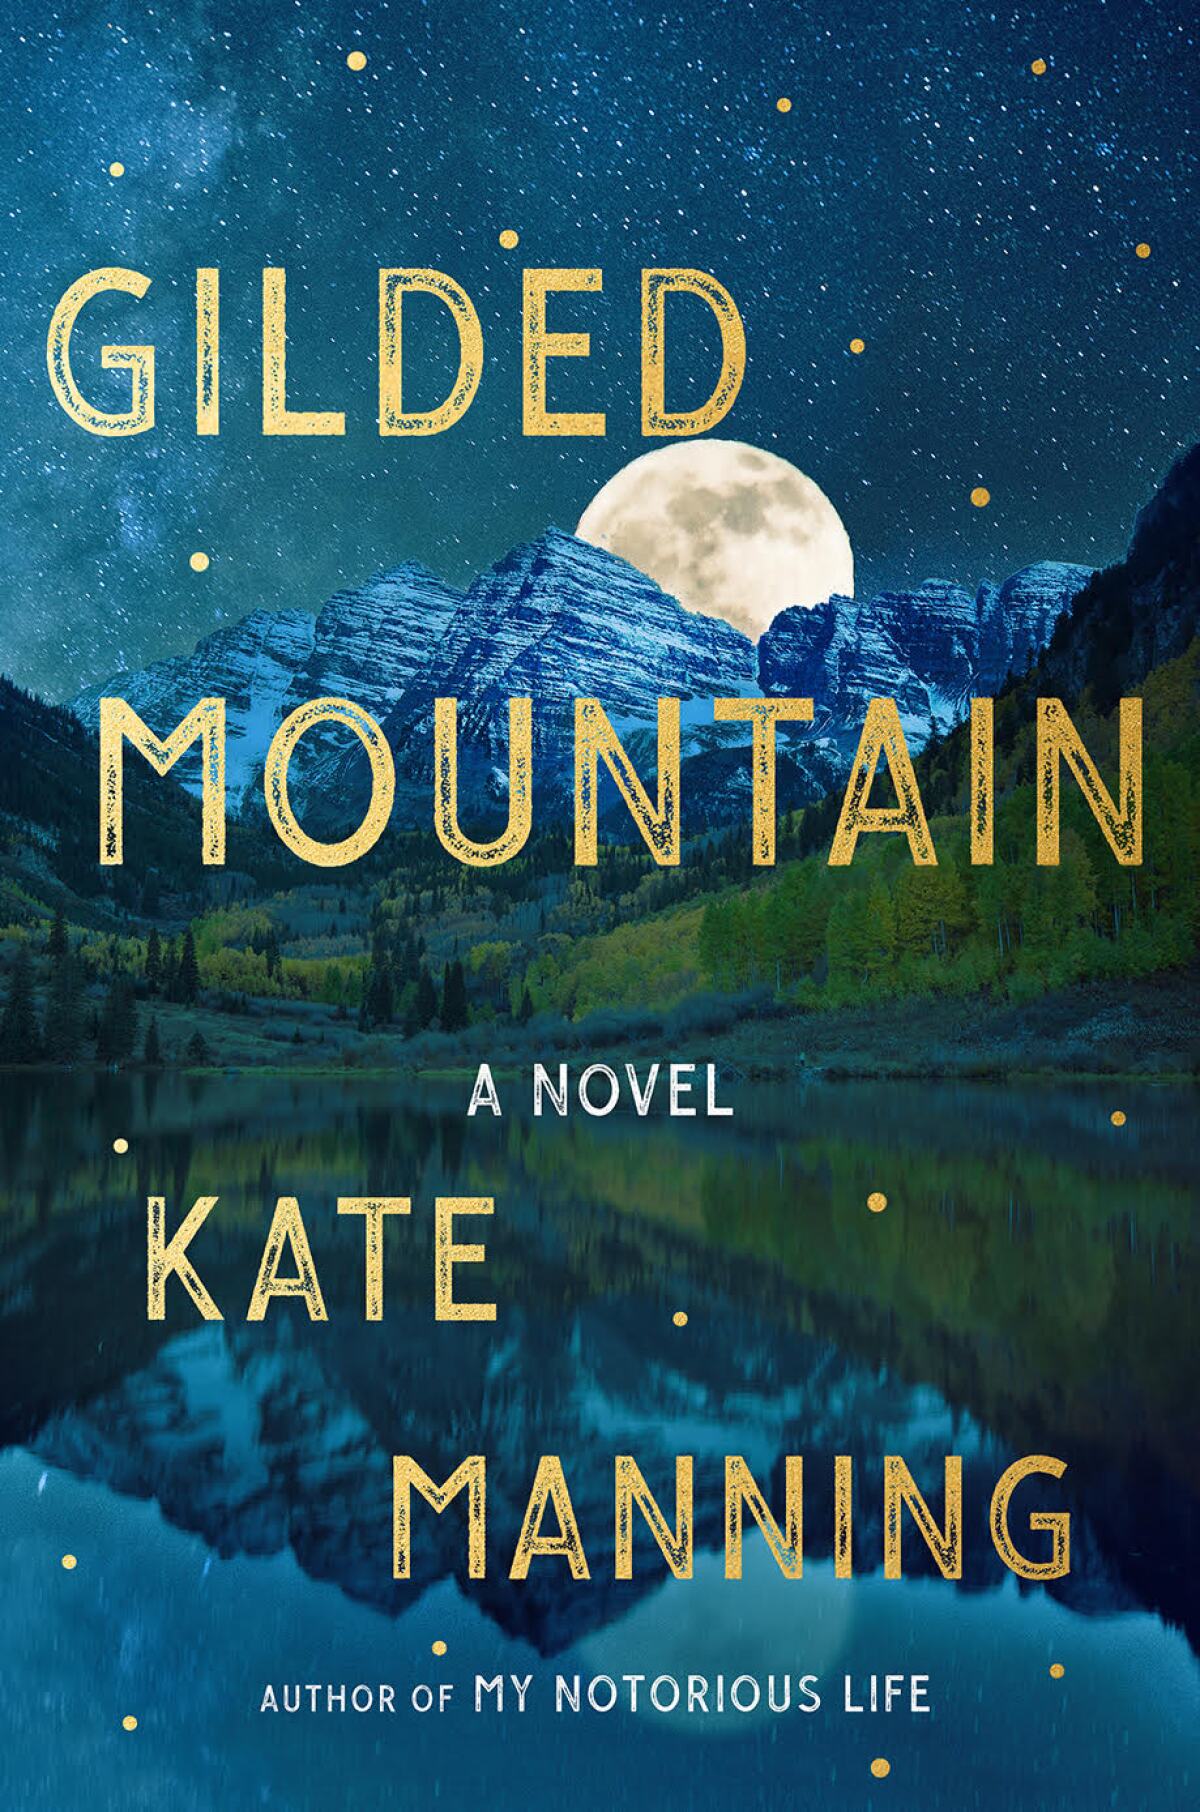 "Gilded Mountain" by Kate Manning